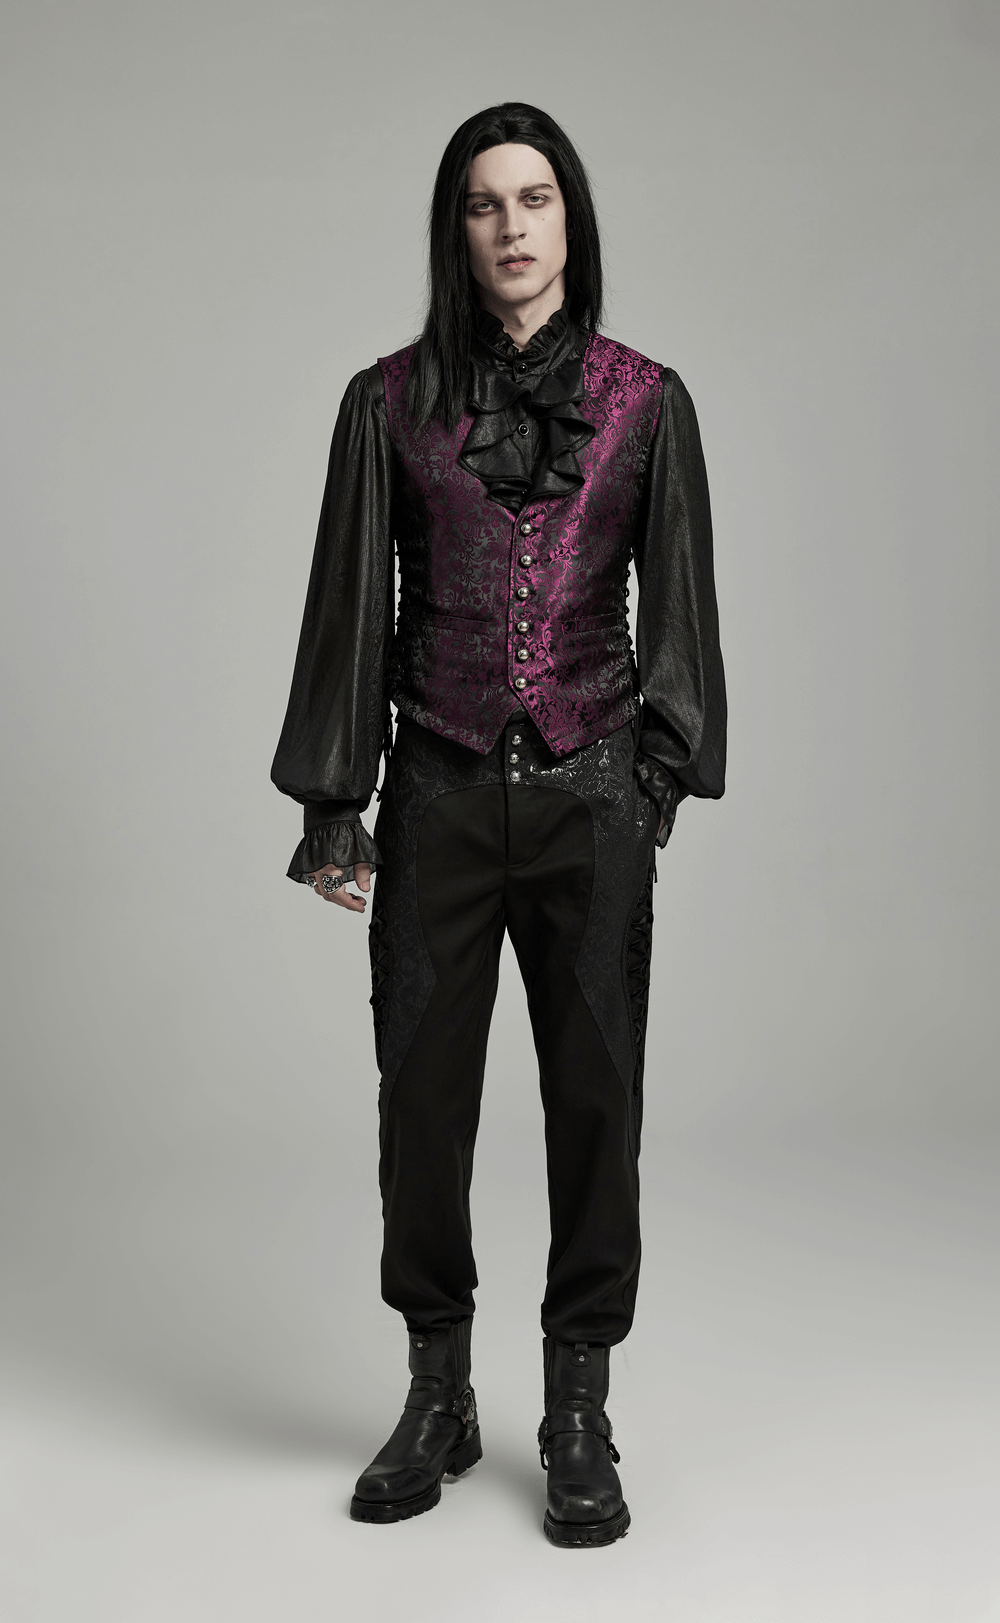 Gothic Men's Jacquard Waistcoat with Floral Pattern